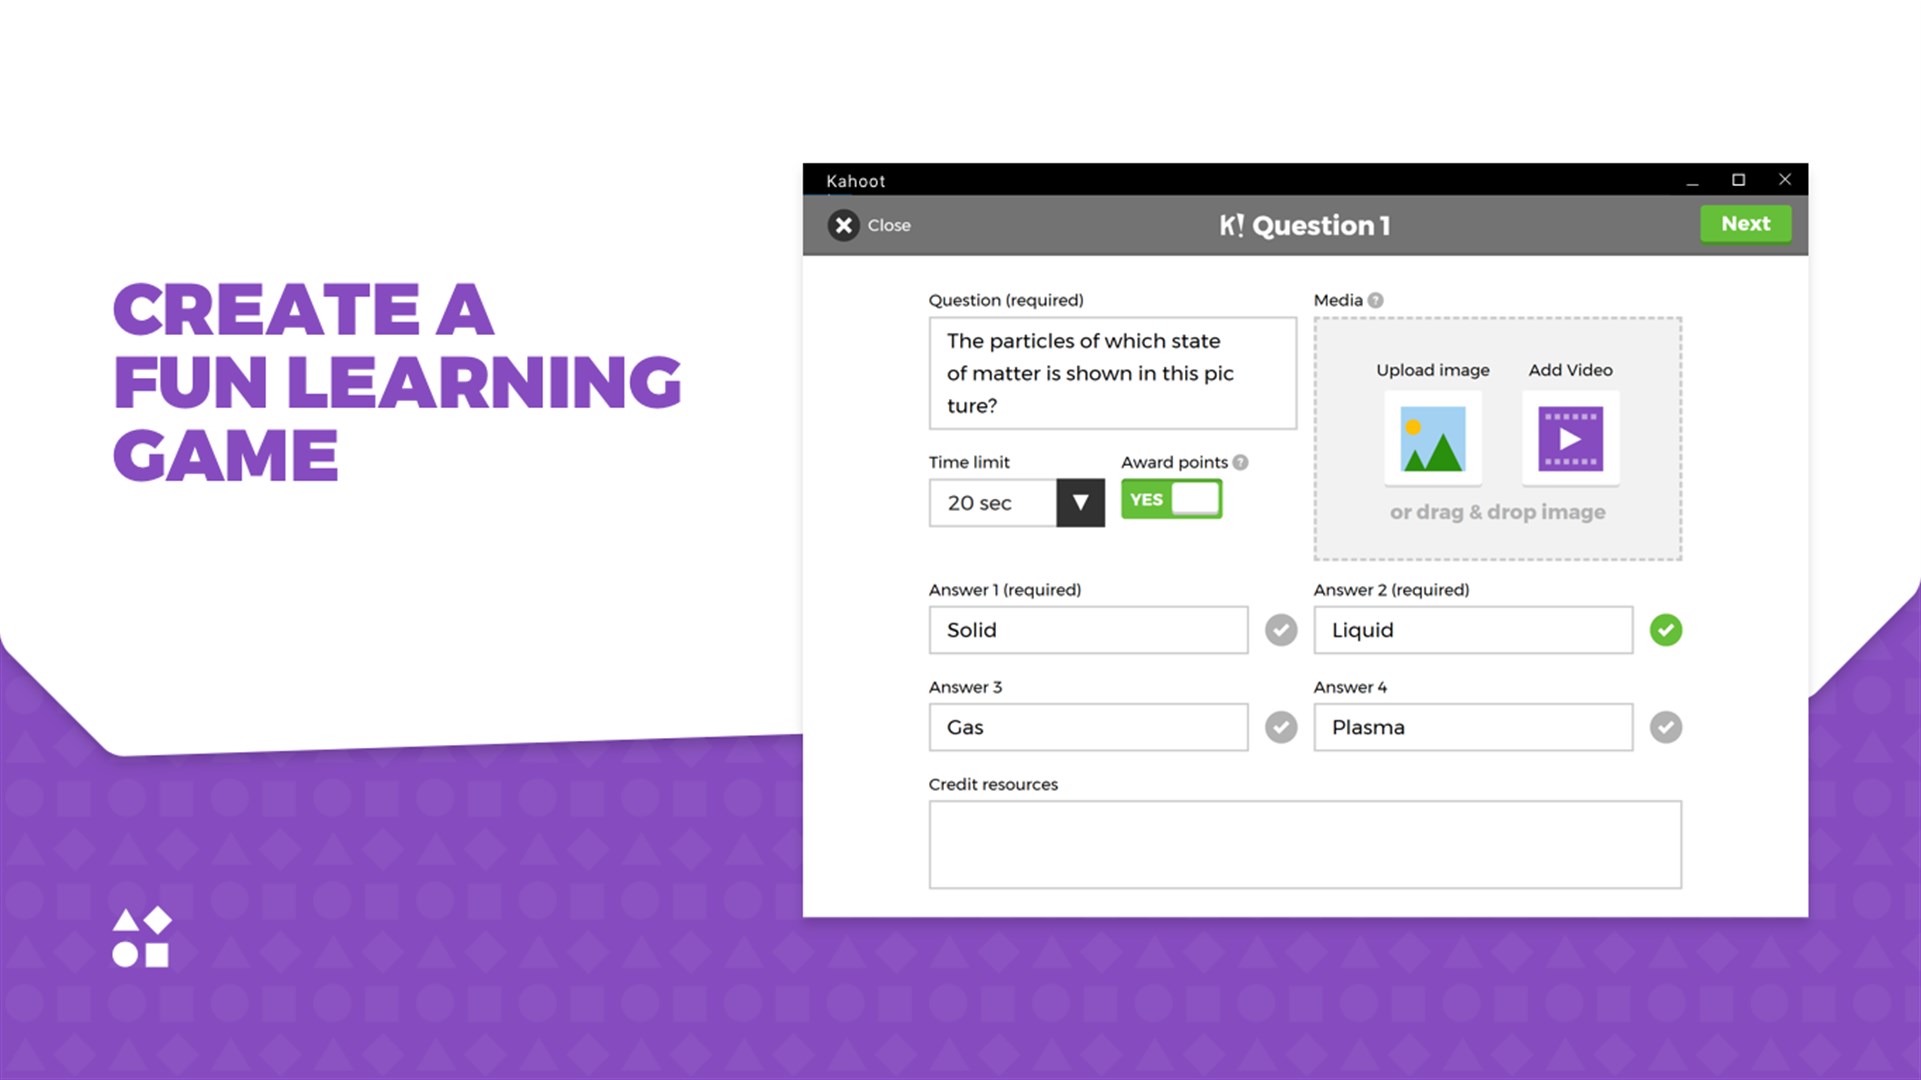 Kahoot is a Fun Free Game-Based Classroom Response System